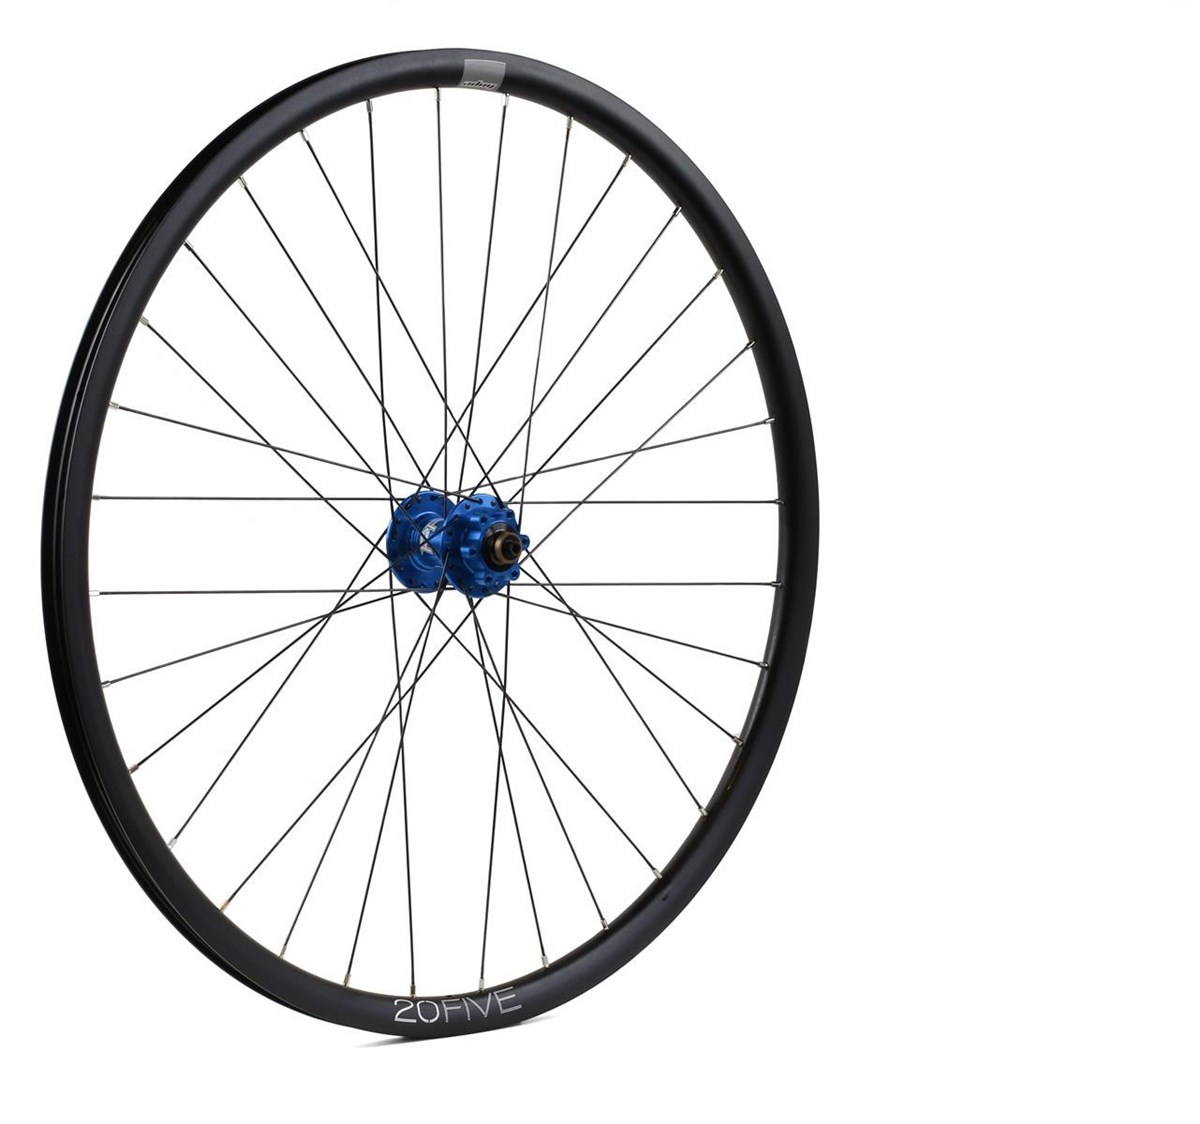 Hope 20FIVE-Pro 4 Cyclocross Rear Wheel product image